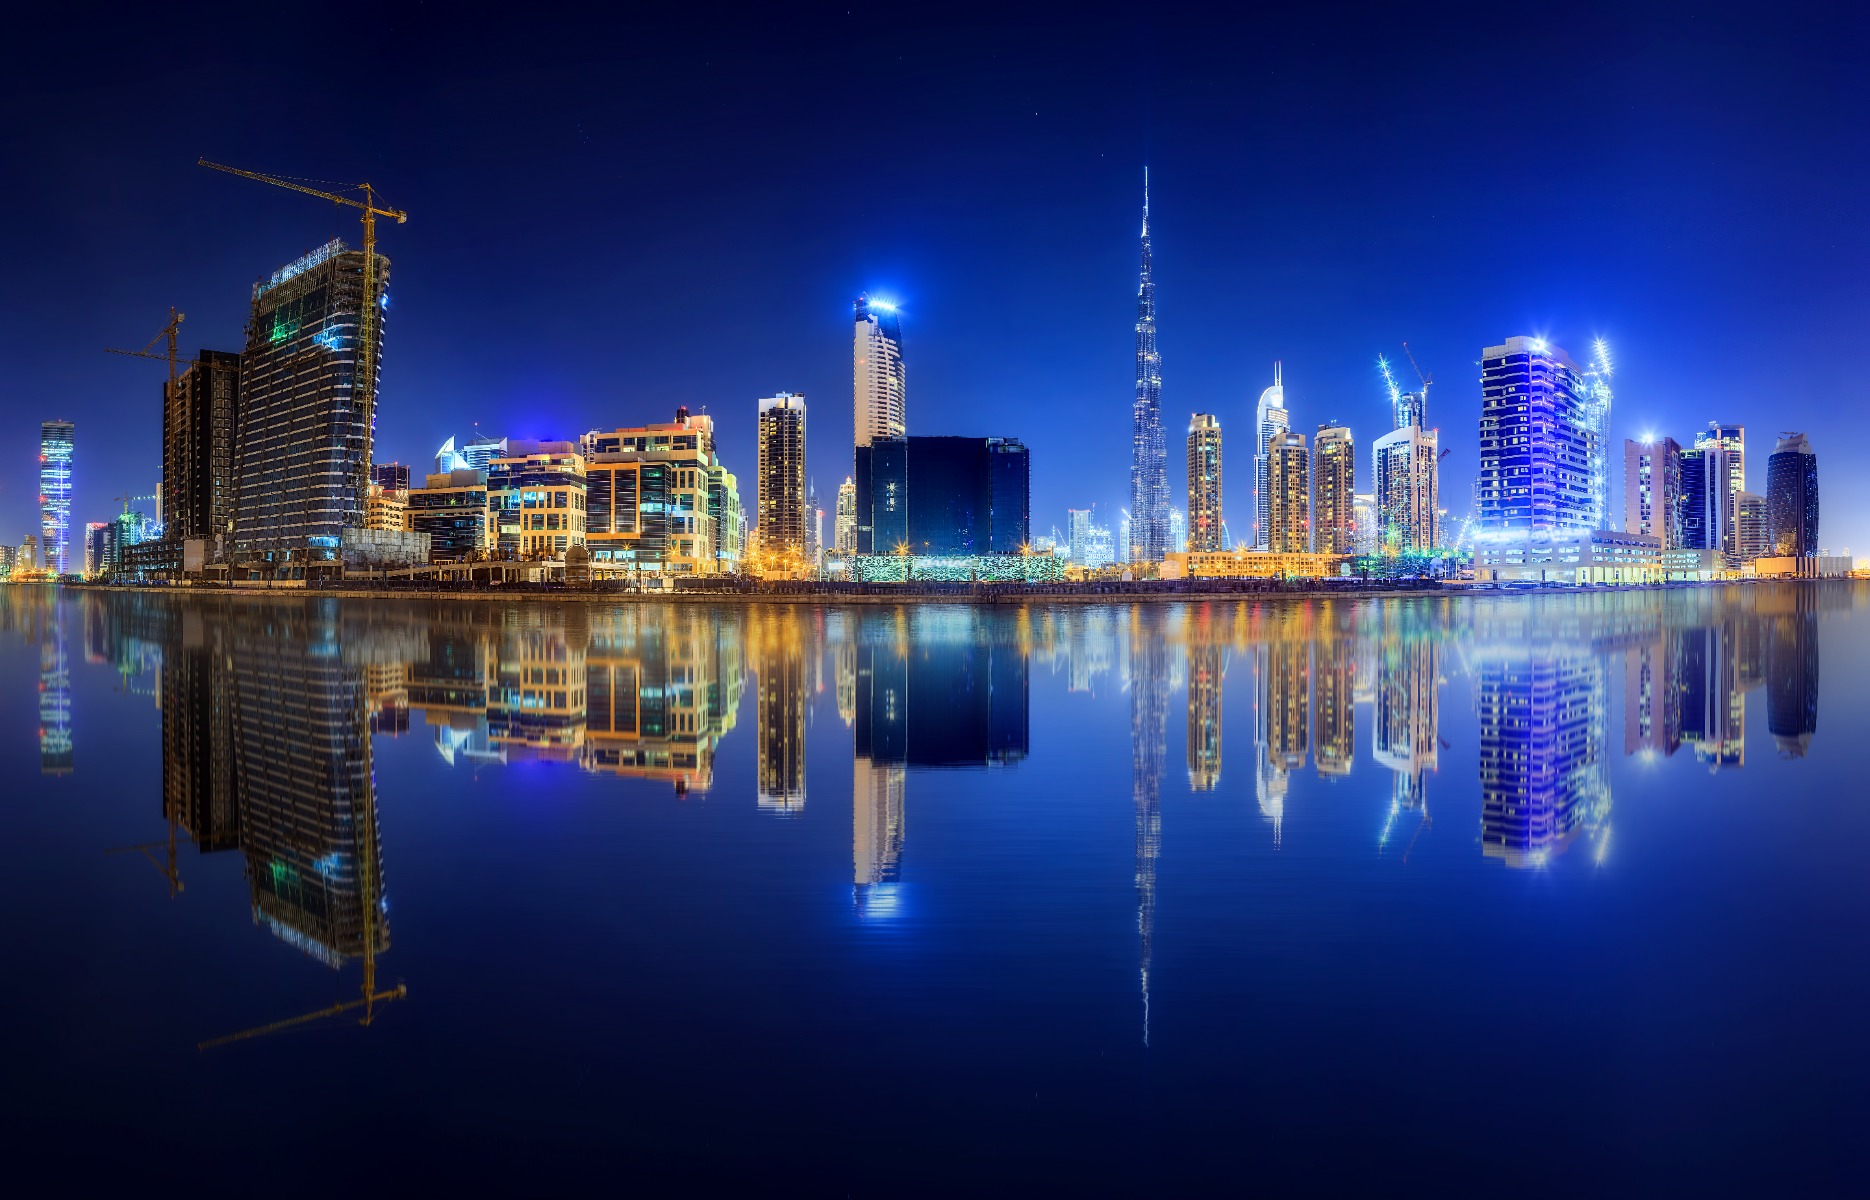 Papel De Parede Night View Of Dubai, Uae City Building 3d Wallpaper,living  Room Tv Wall Bedroom Wall Papers Home Decor Bar Mural - Wallpapers -  AliExpress